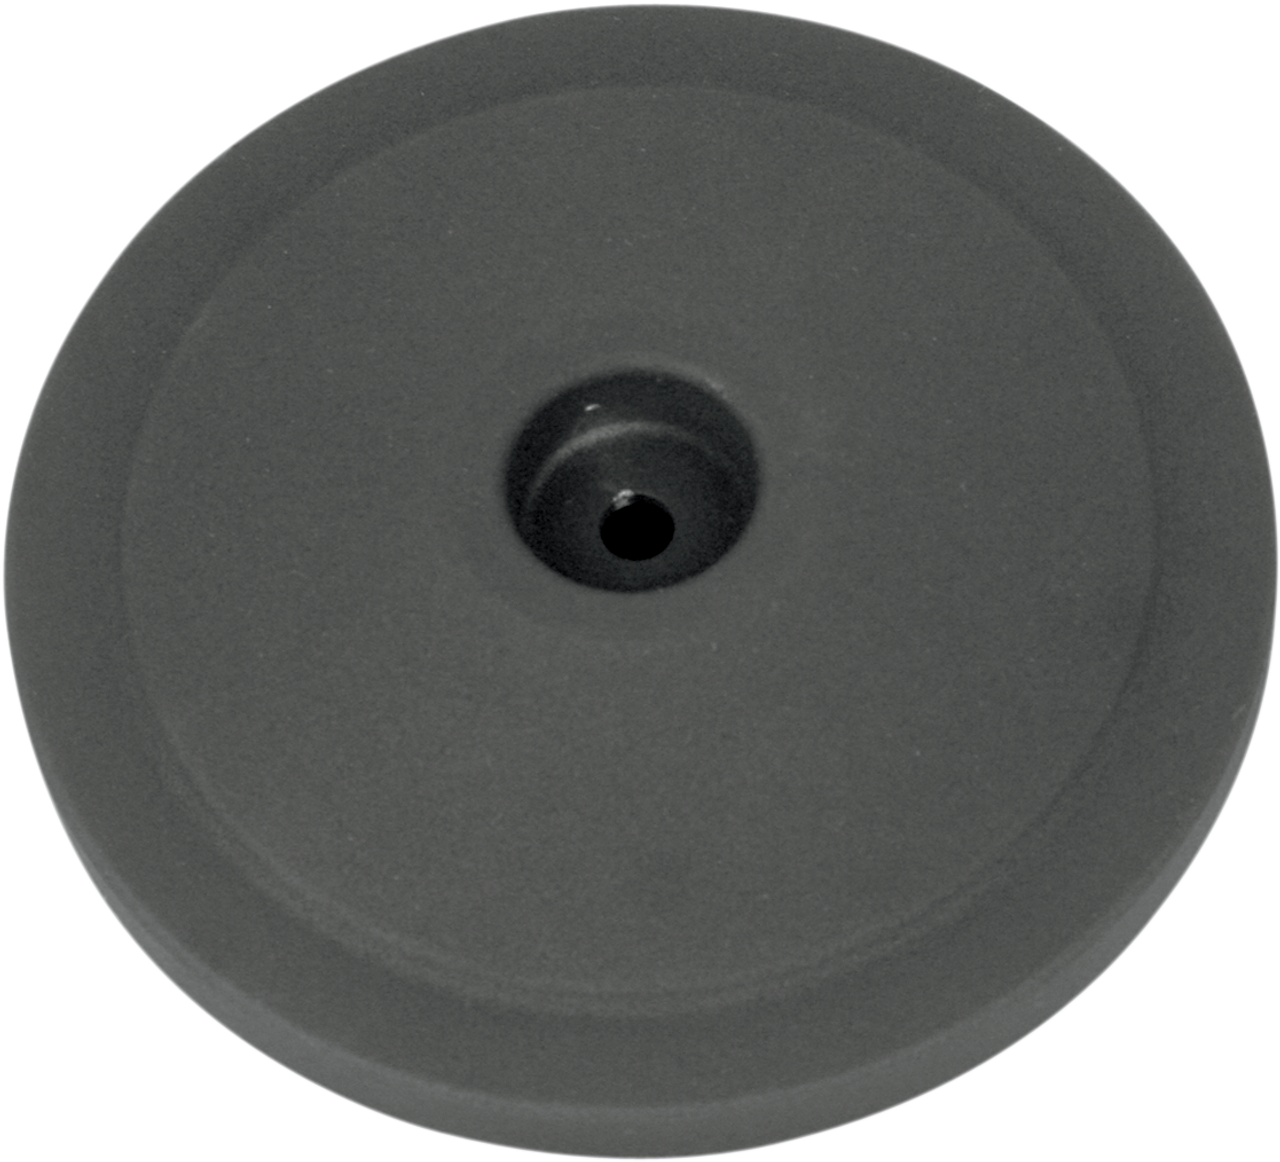 S&S Cycle 170-0124 - Bob Dome Air Cleaner Cover - Black